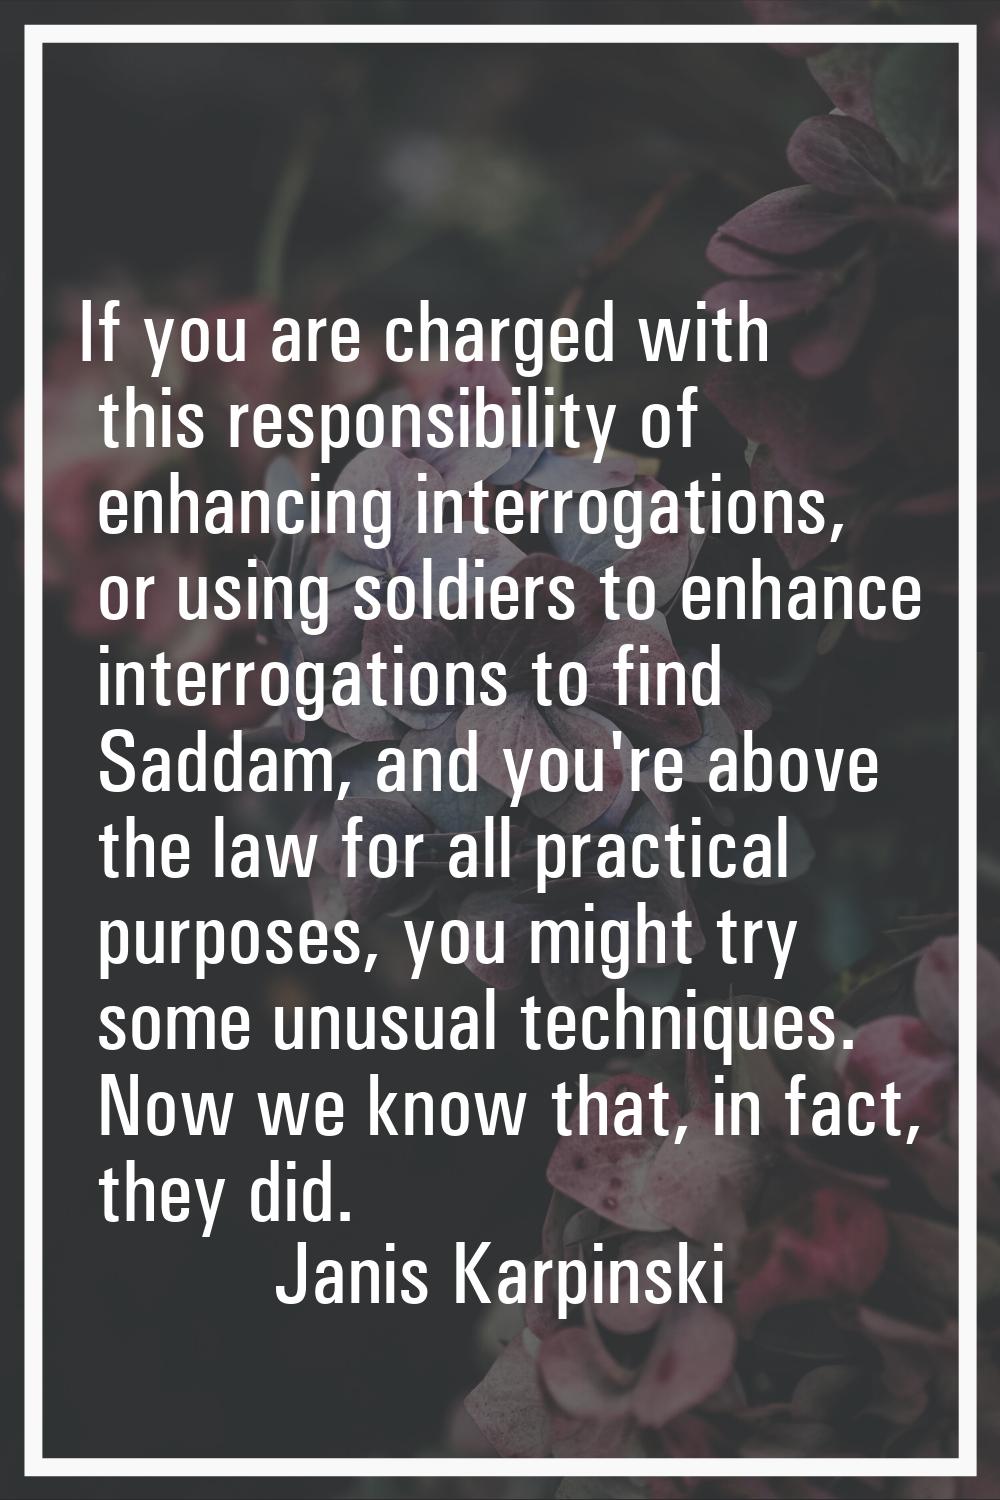 If you are charged with this responsibility of enhancing interrogations, or using soldiers to enhan